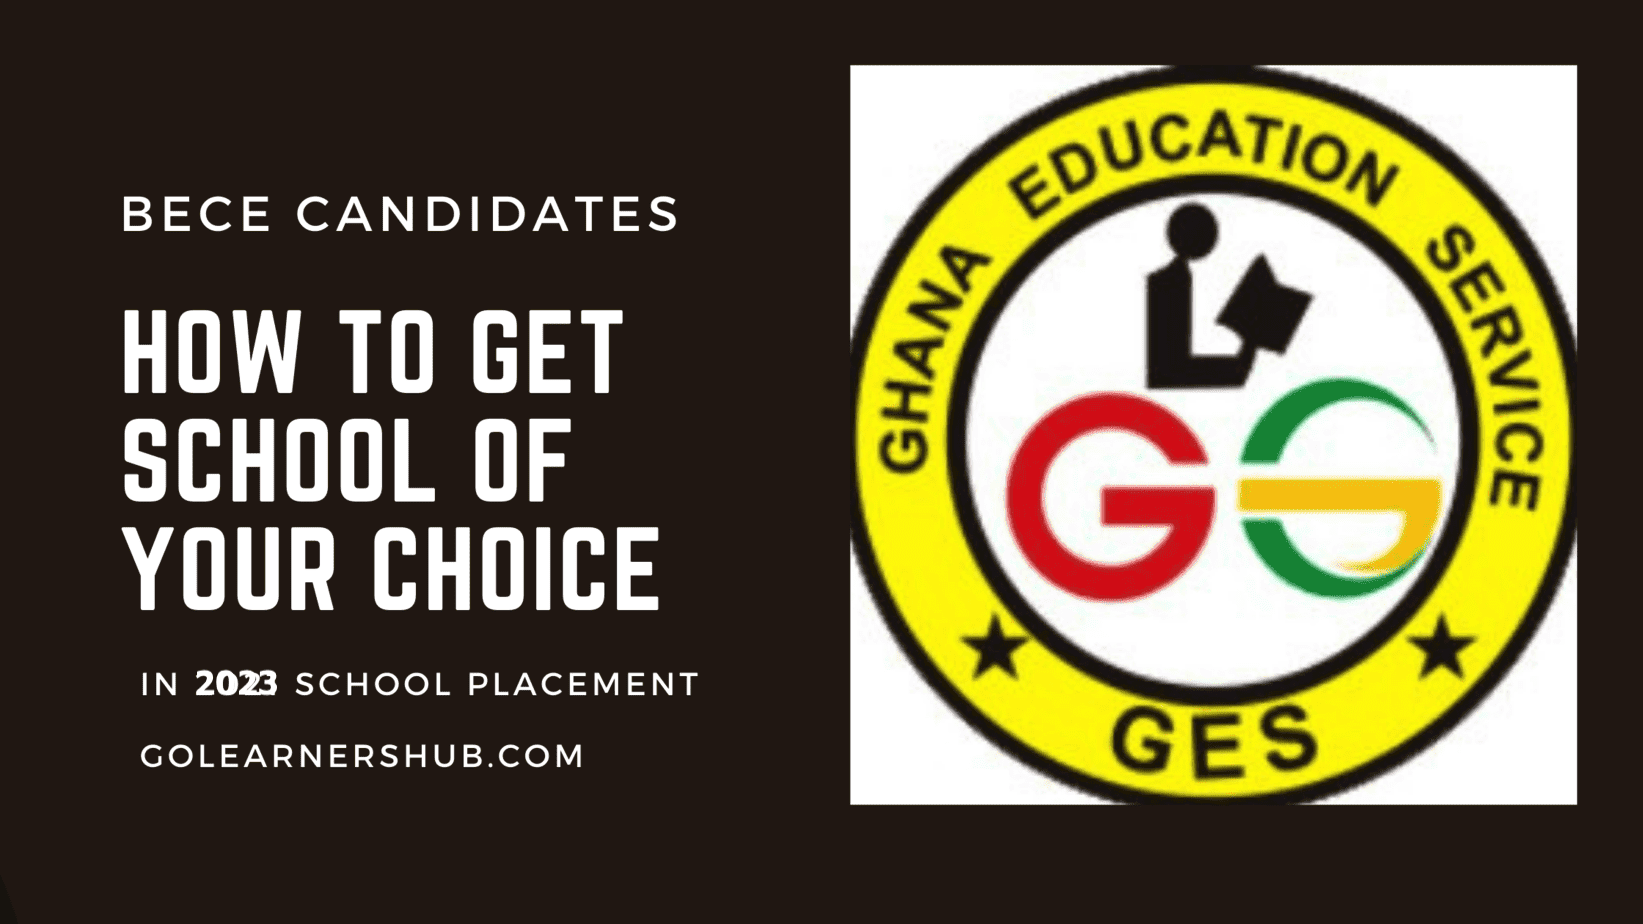 BECE Candidates, See How to Get School of your Choice in 2023 Placement